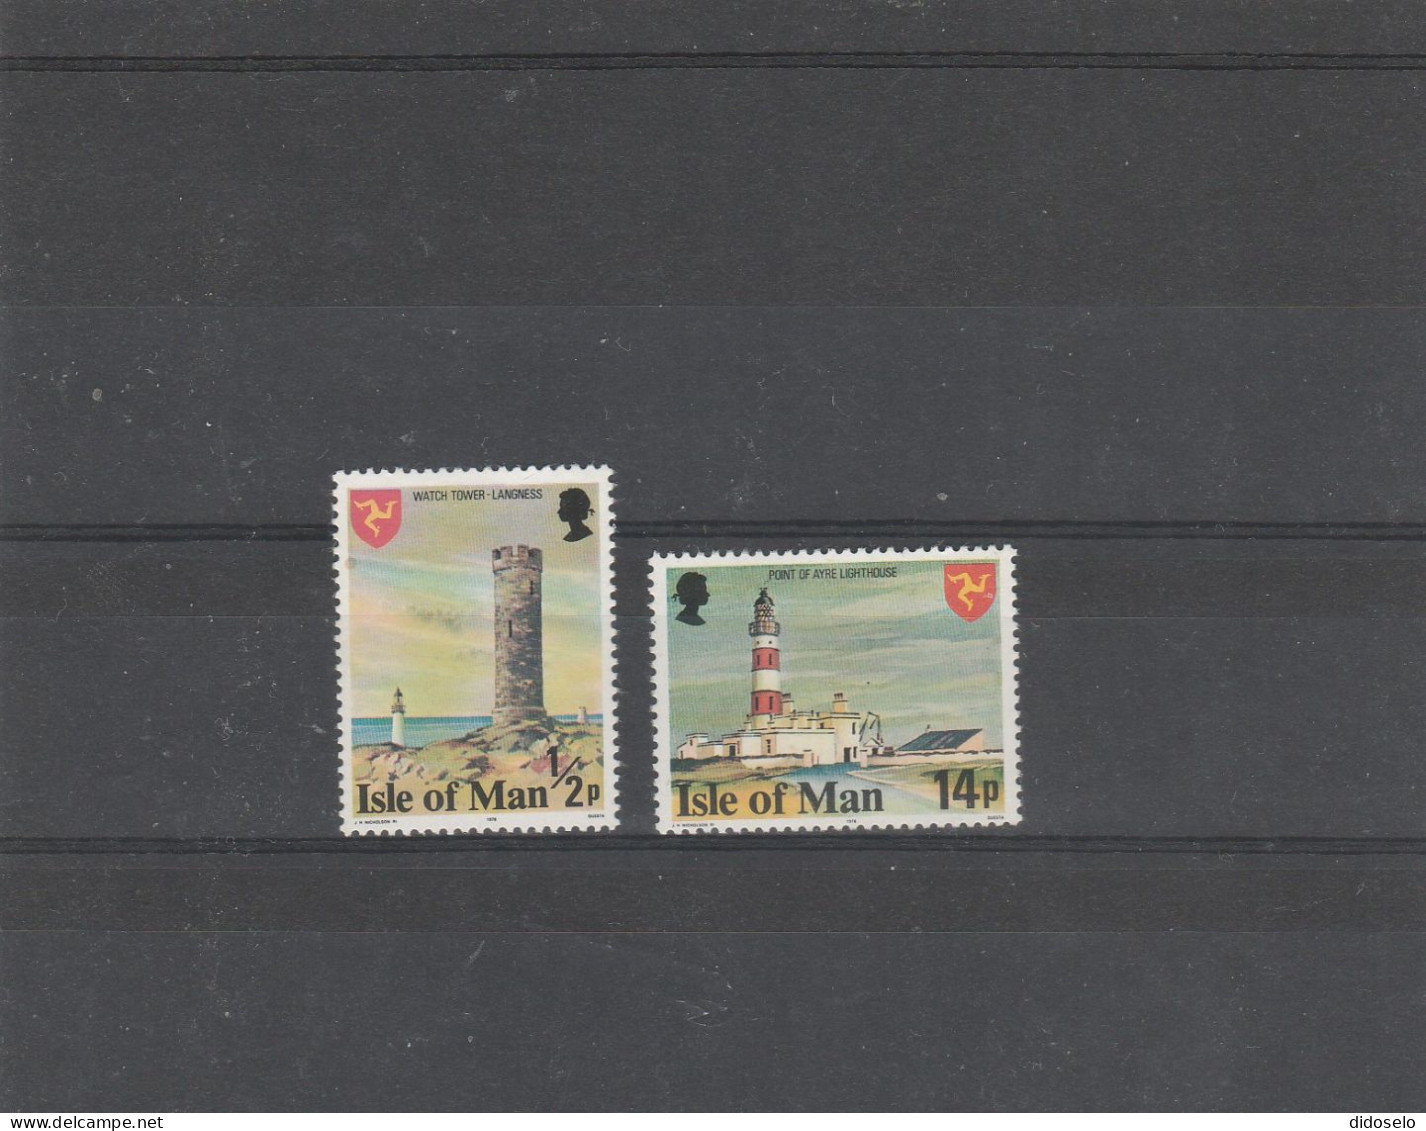 Isle Of Man - 1978 - Topic Lighthouse MNH (**) Stamps - Lighthouses